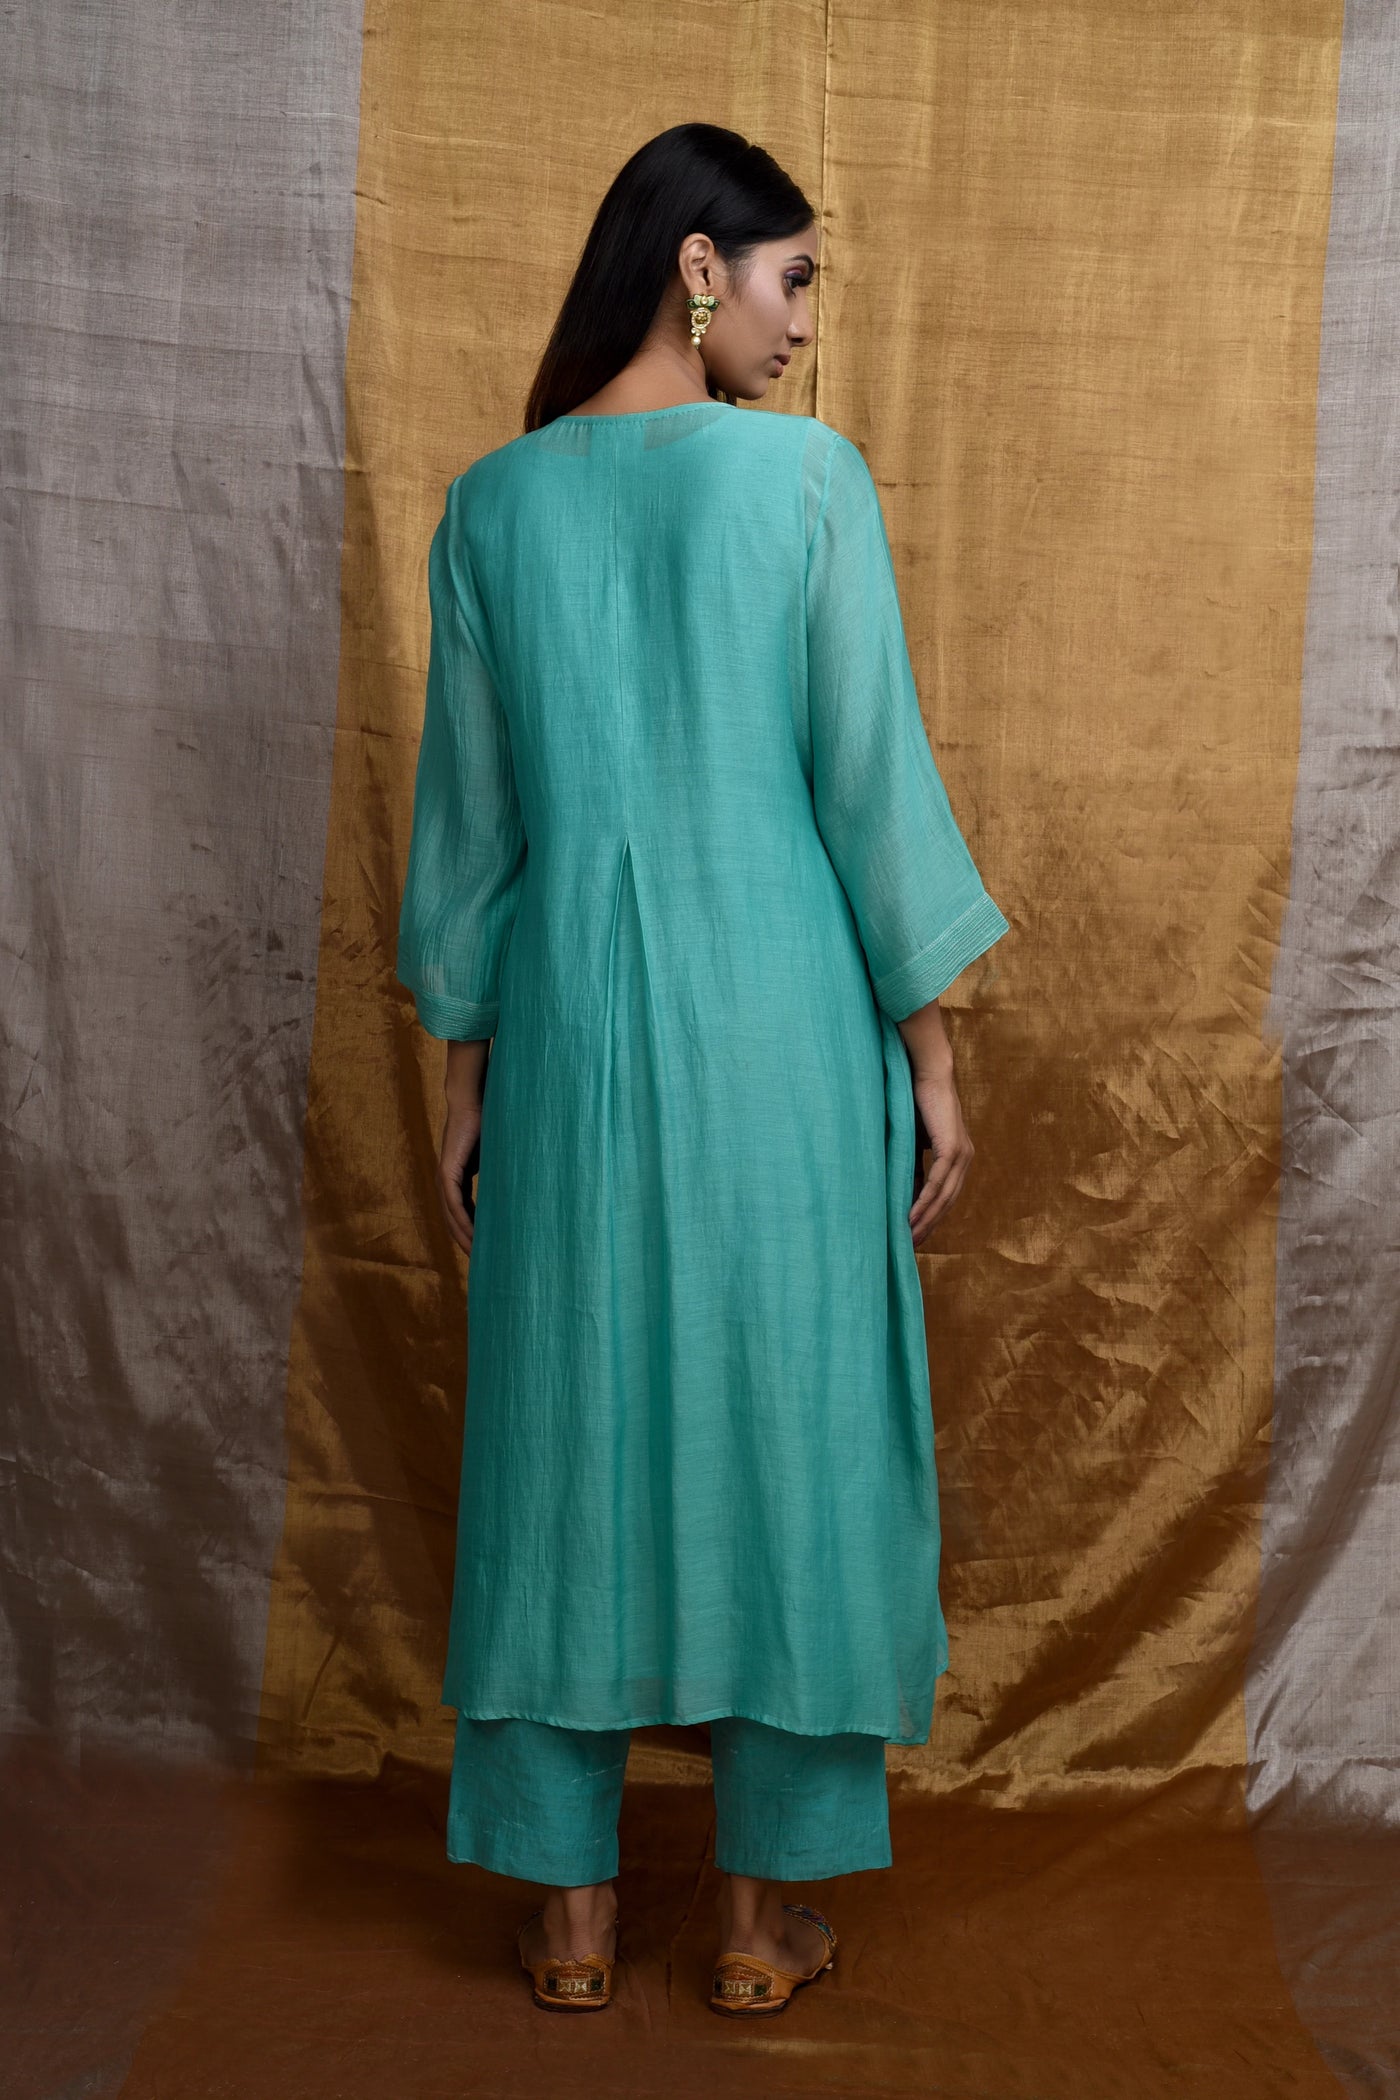 Turquoise kurta Set - Indian Clothing in Denver, CO, Aurora, CO, Boulder, CO, Fort Collins, CO, Colorado Springs, CO, Parker, CO, Highlands Ranch, CO, Cherry Creek, CO, Centennial, CO, and Longmont, CO. Nationwide shipping USA - India Fashion X